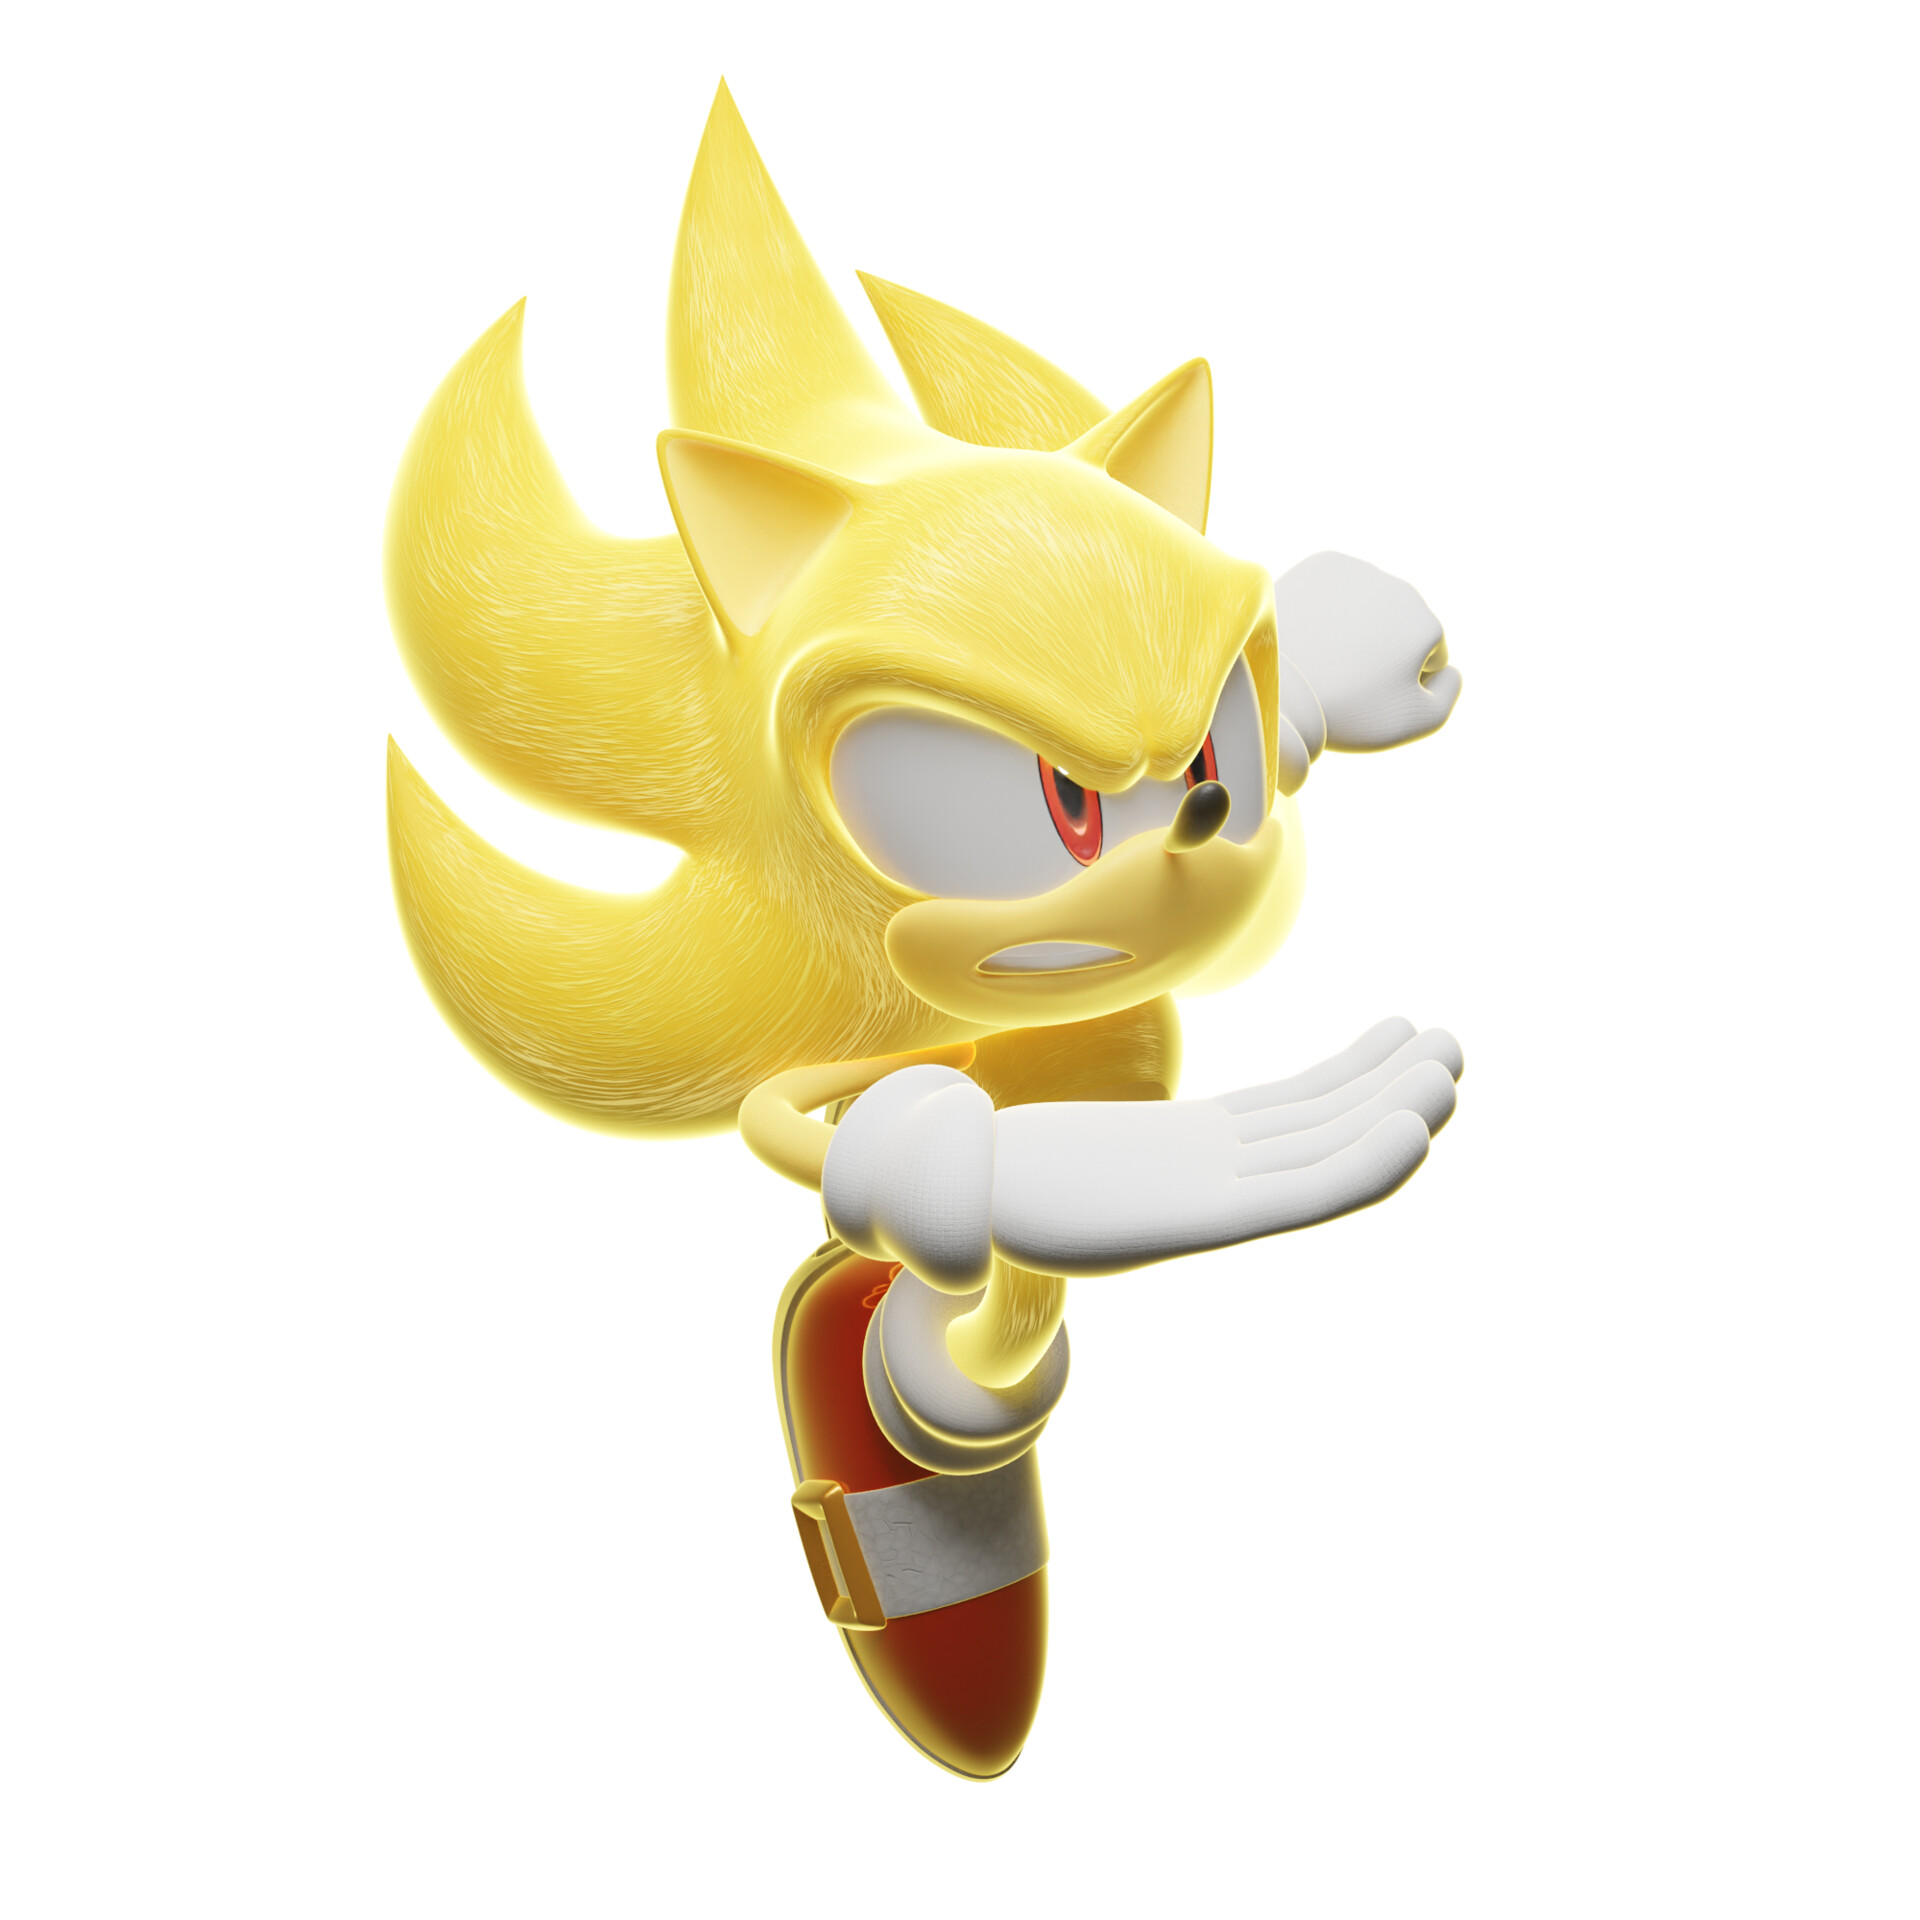 ArtStation - Super Sonic, Tails and Knuckles 💎 Super Team Sonic